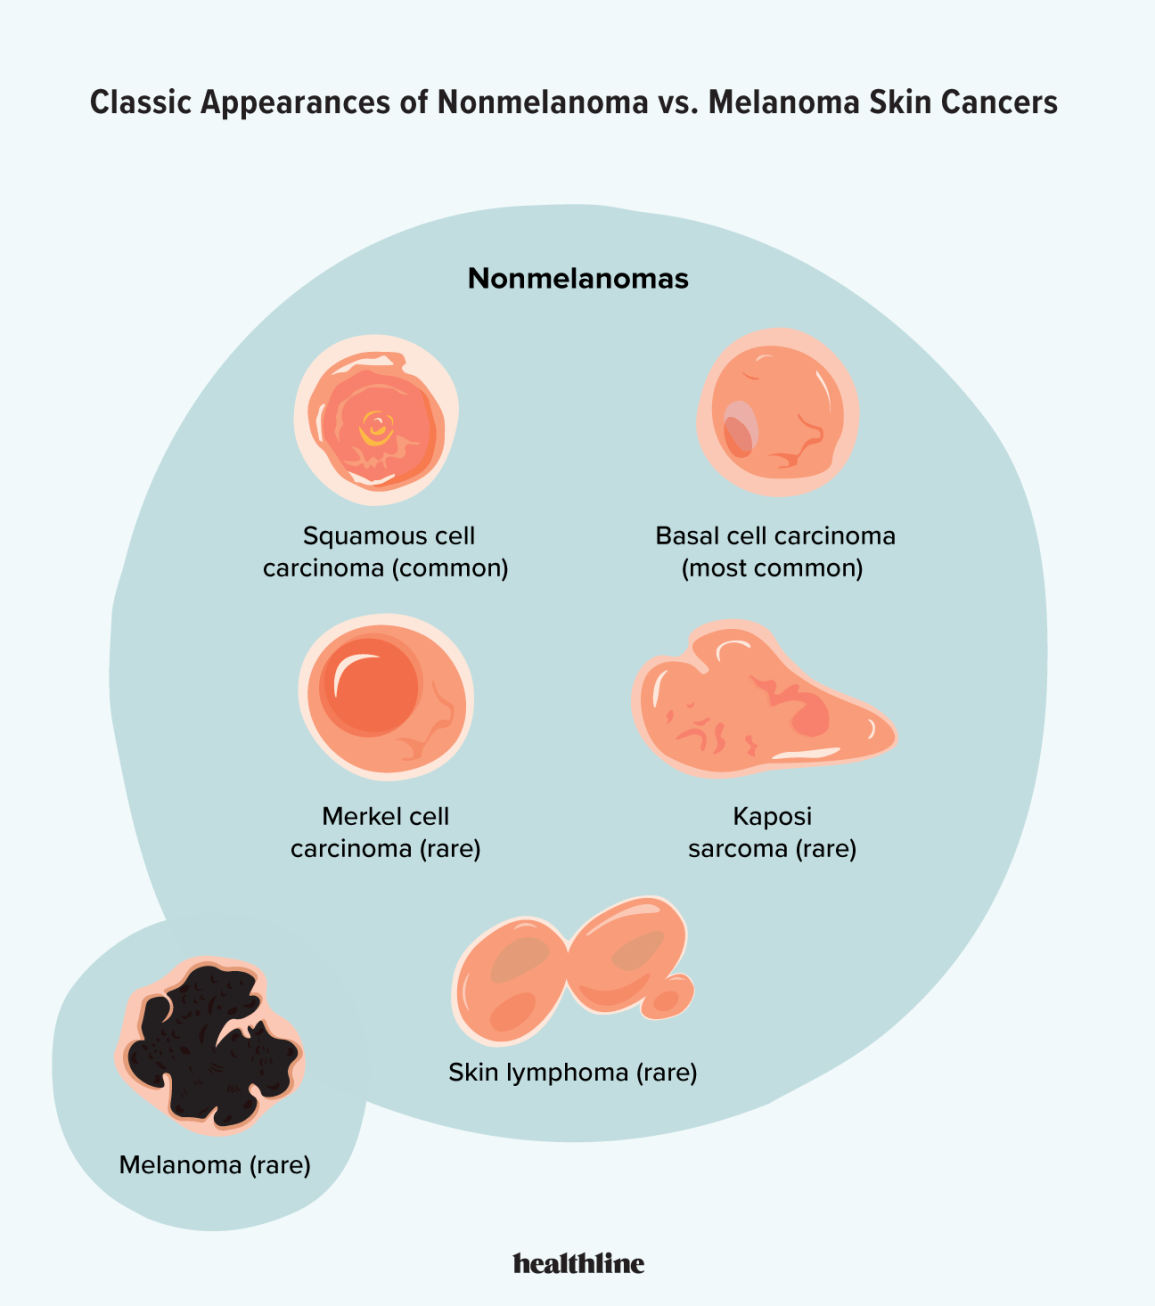 how different skin cancer types tend to appear